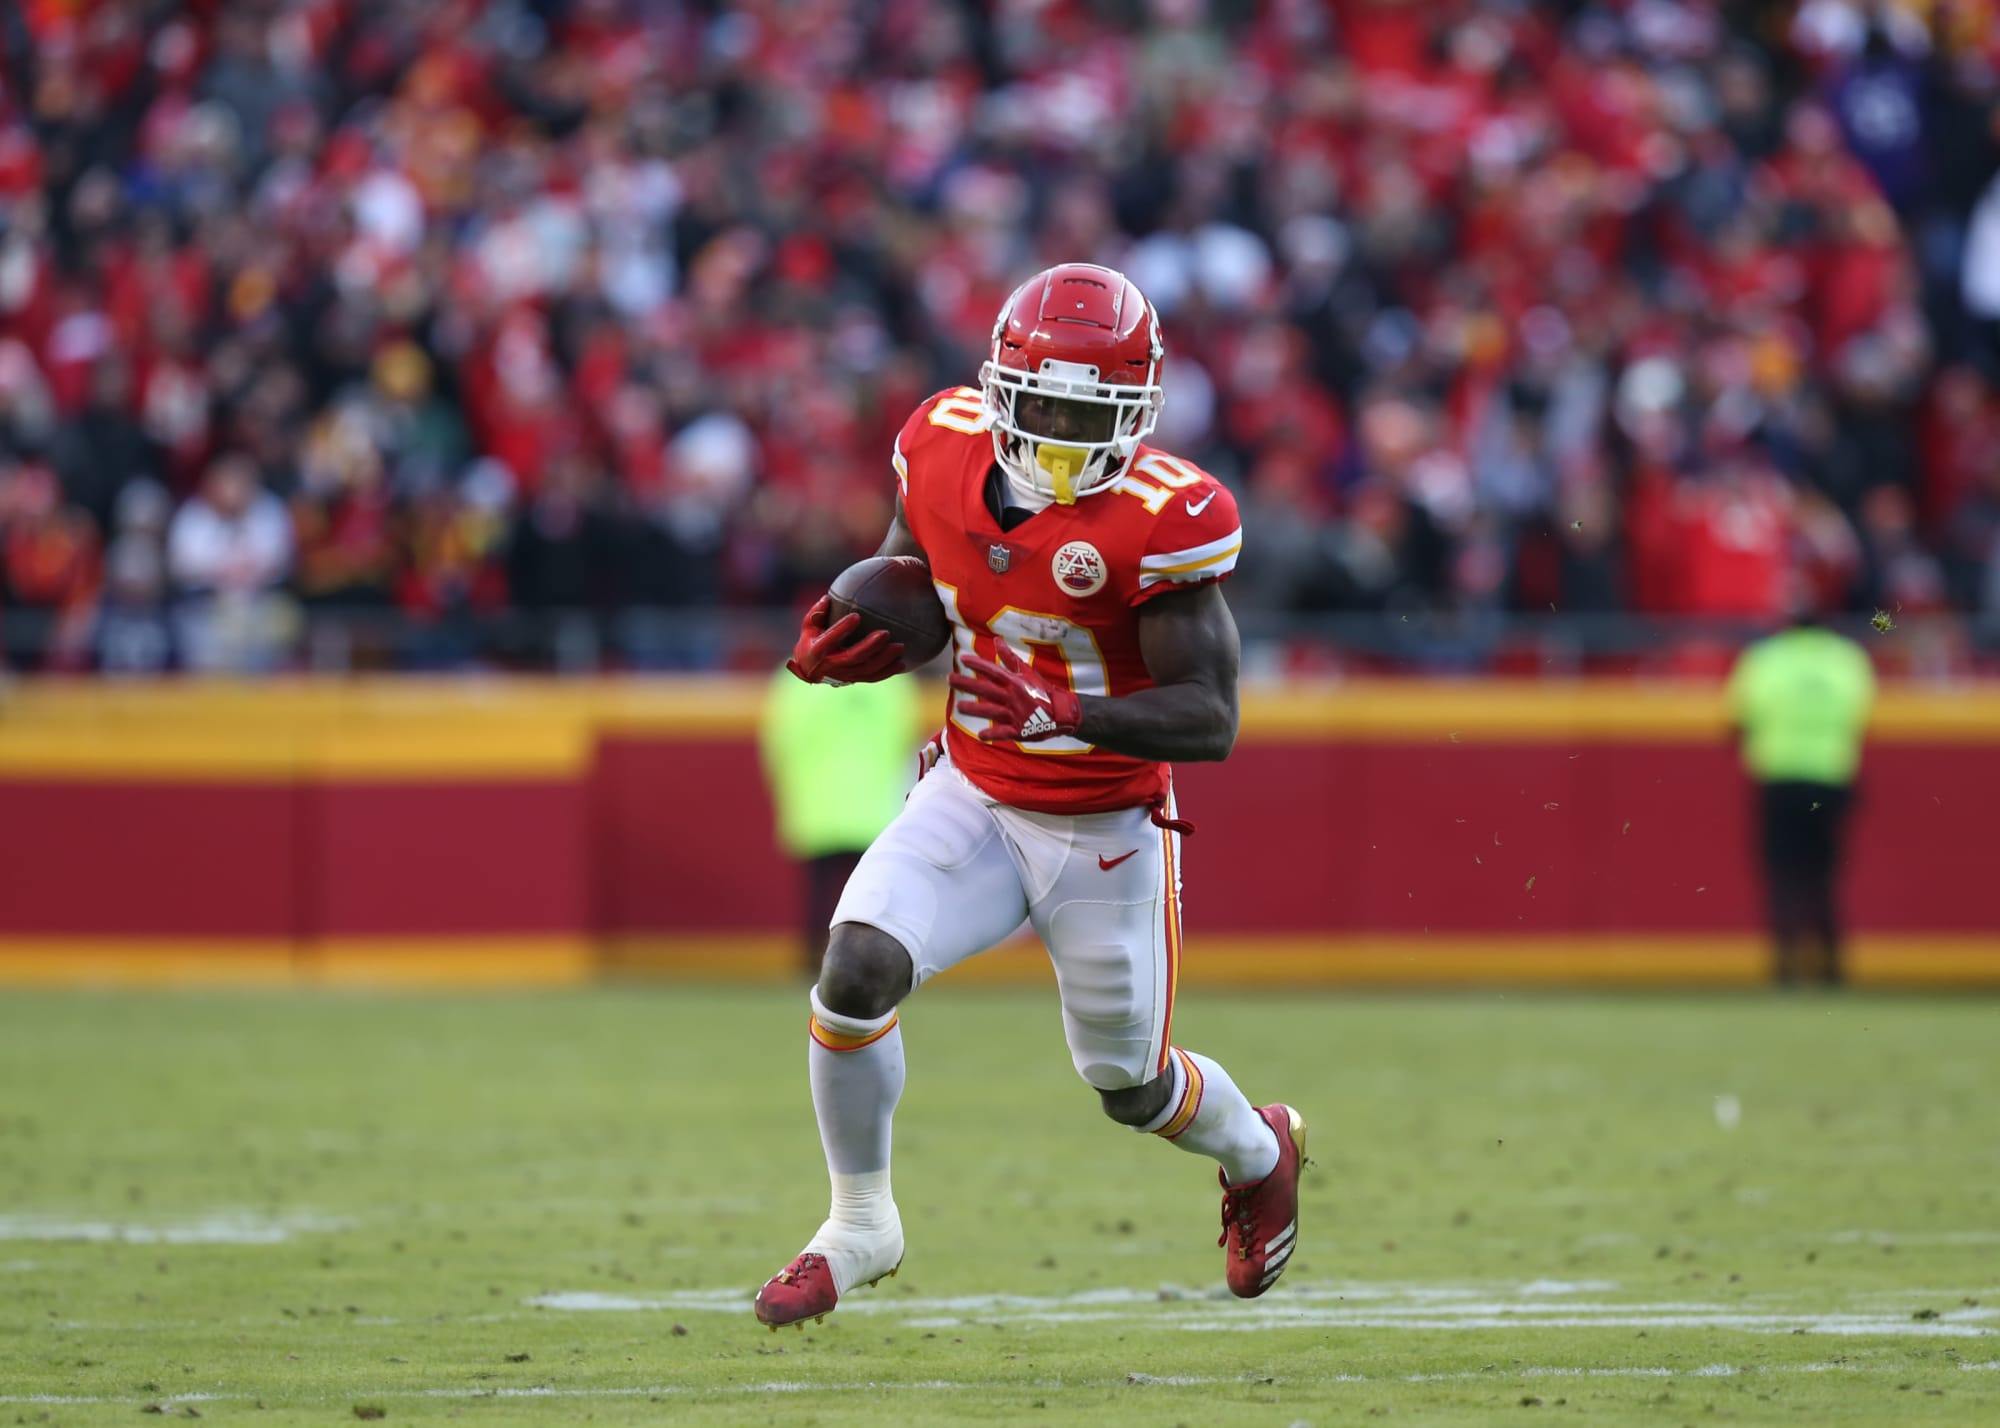 Kansas City Chiefs: No need to rush Tyreek Hill back into offense